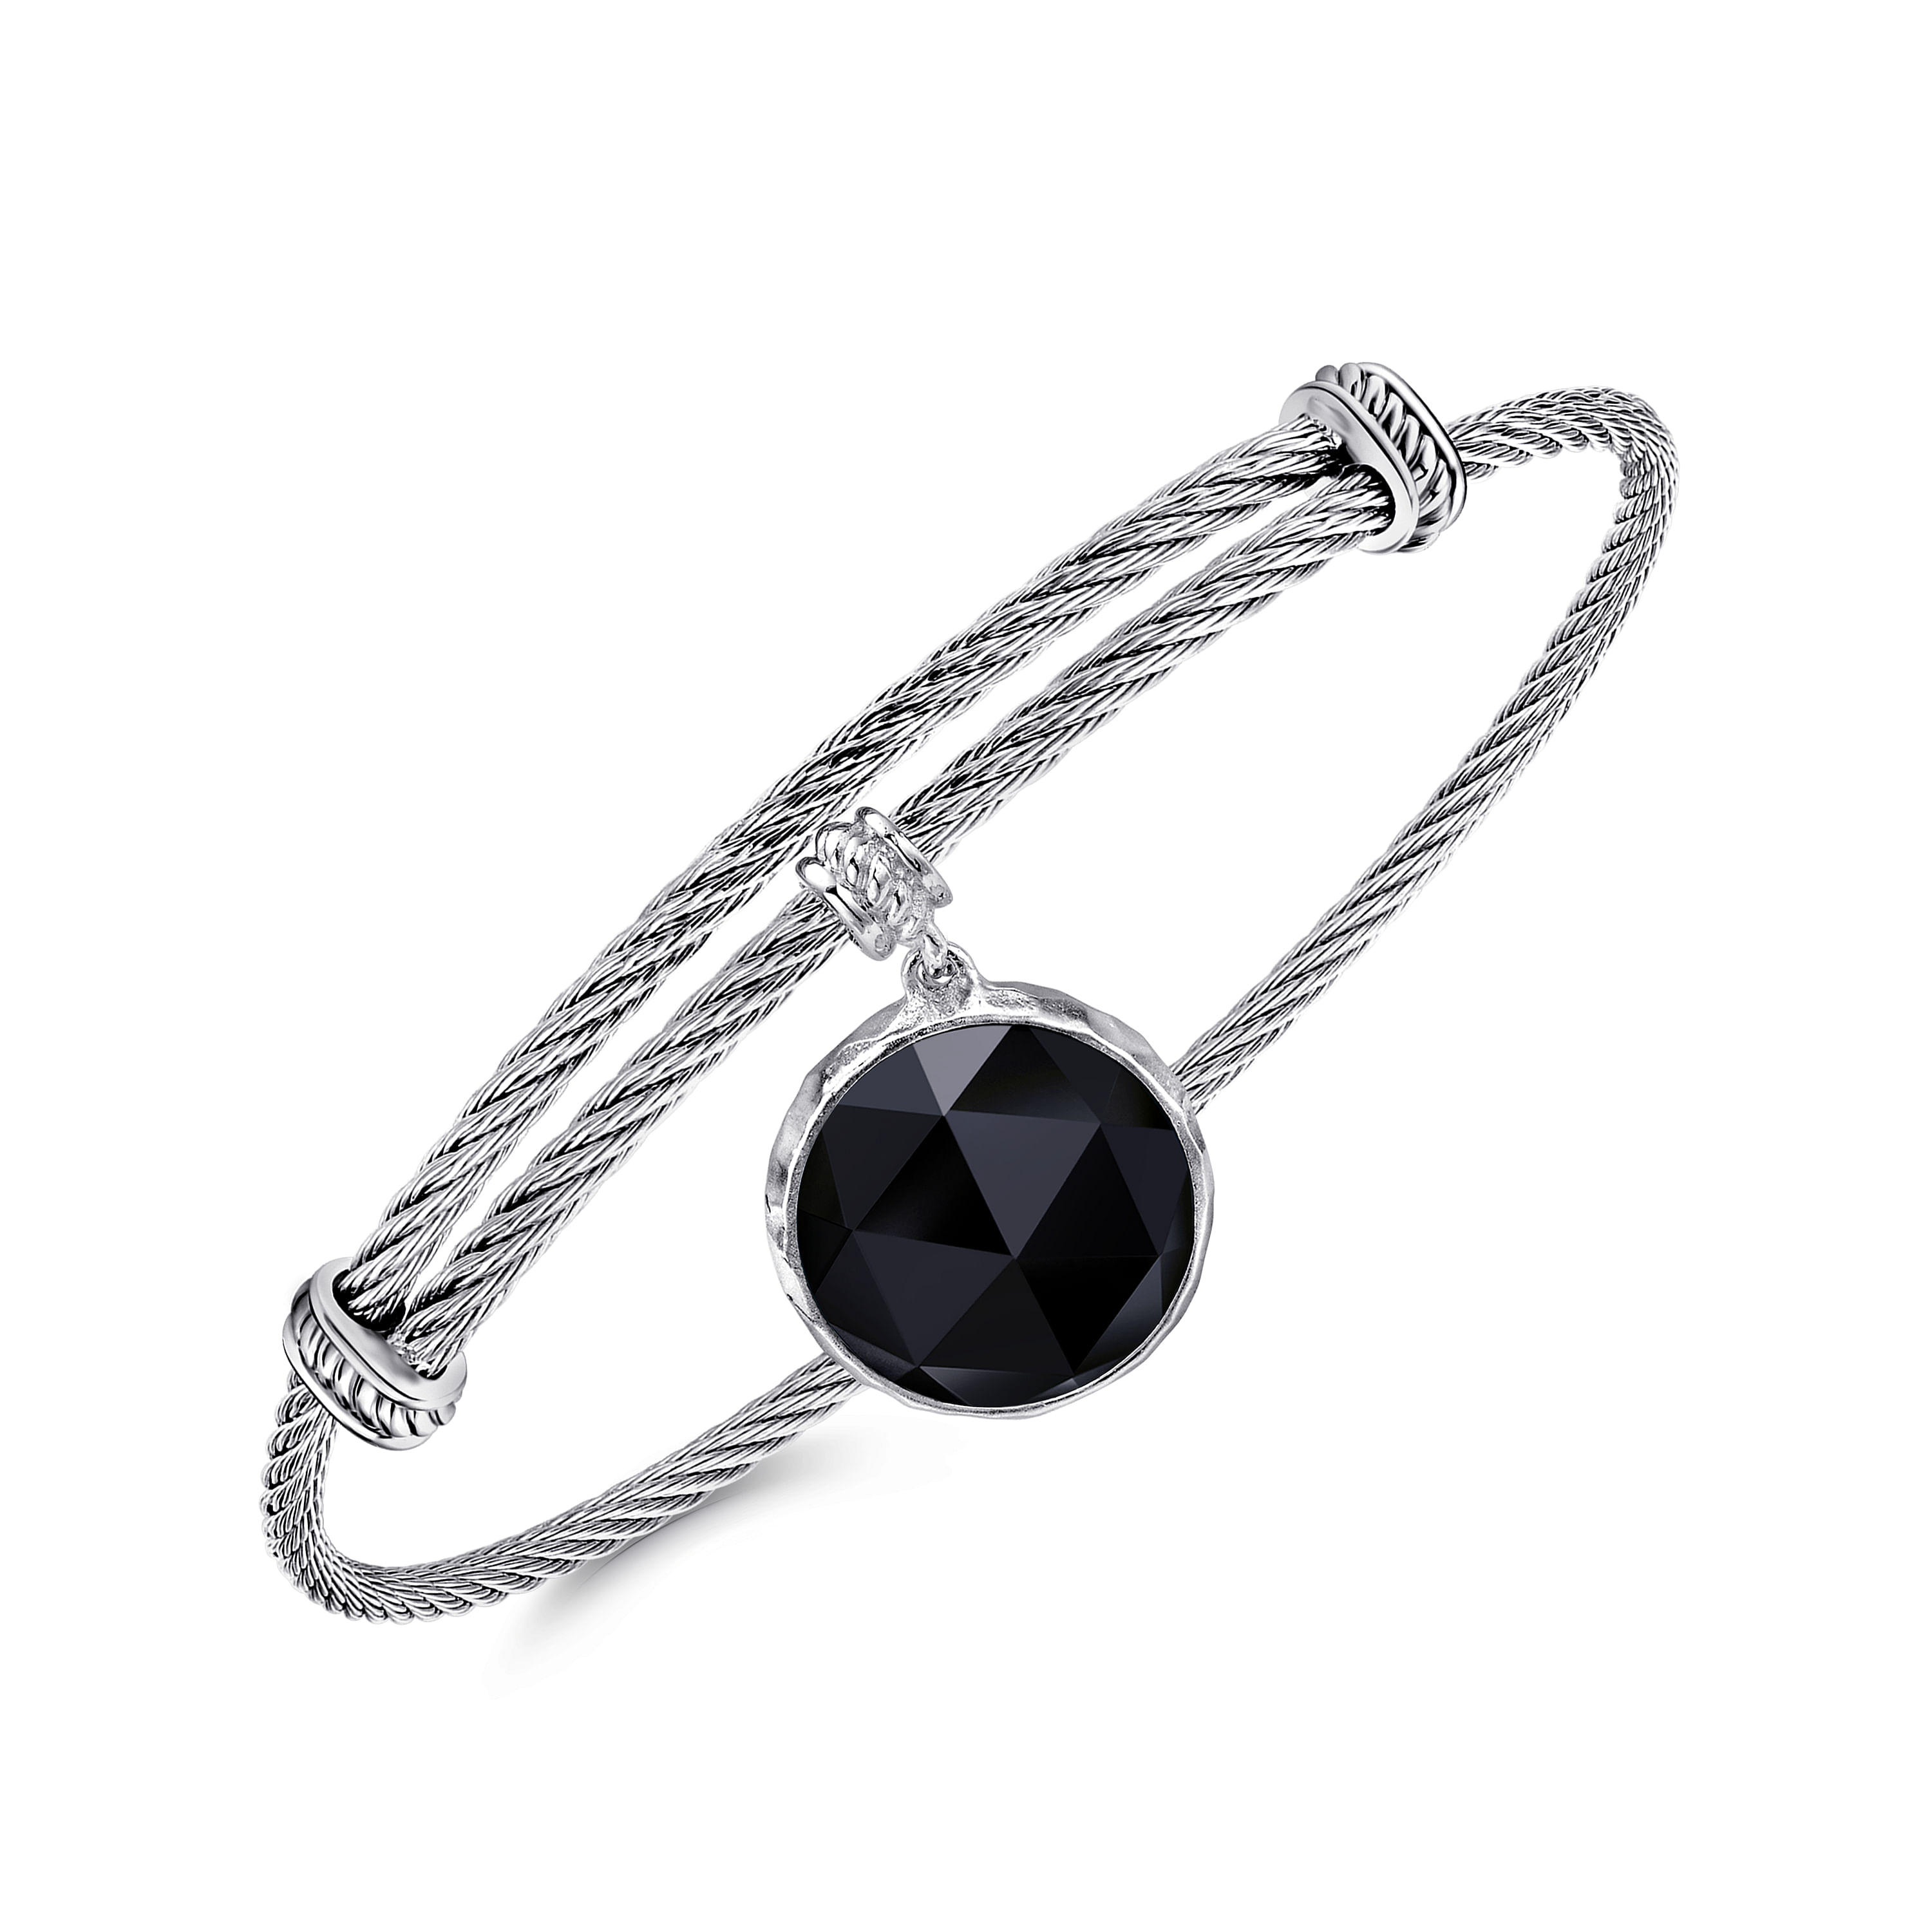 Adjustable Twisted Cable Stainless Steel Bangle with Round Sterling Silver Rock Crystal/Black Onyx Charm